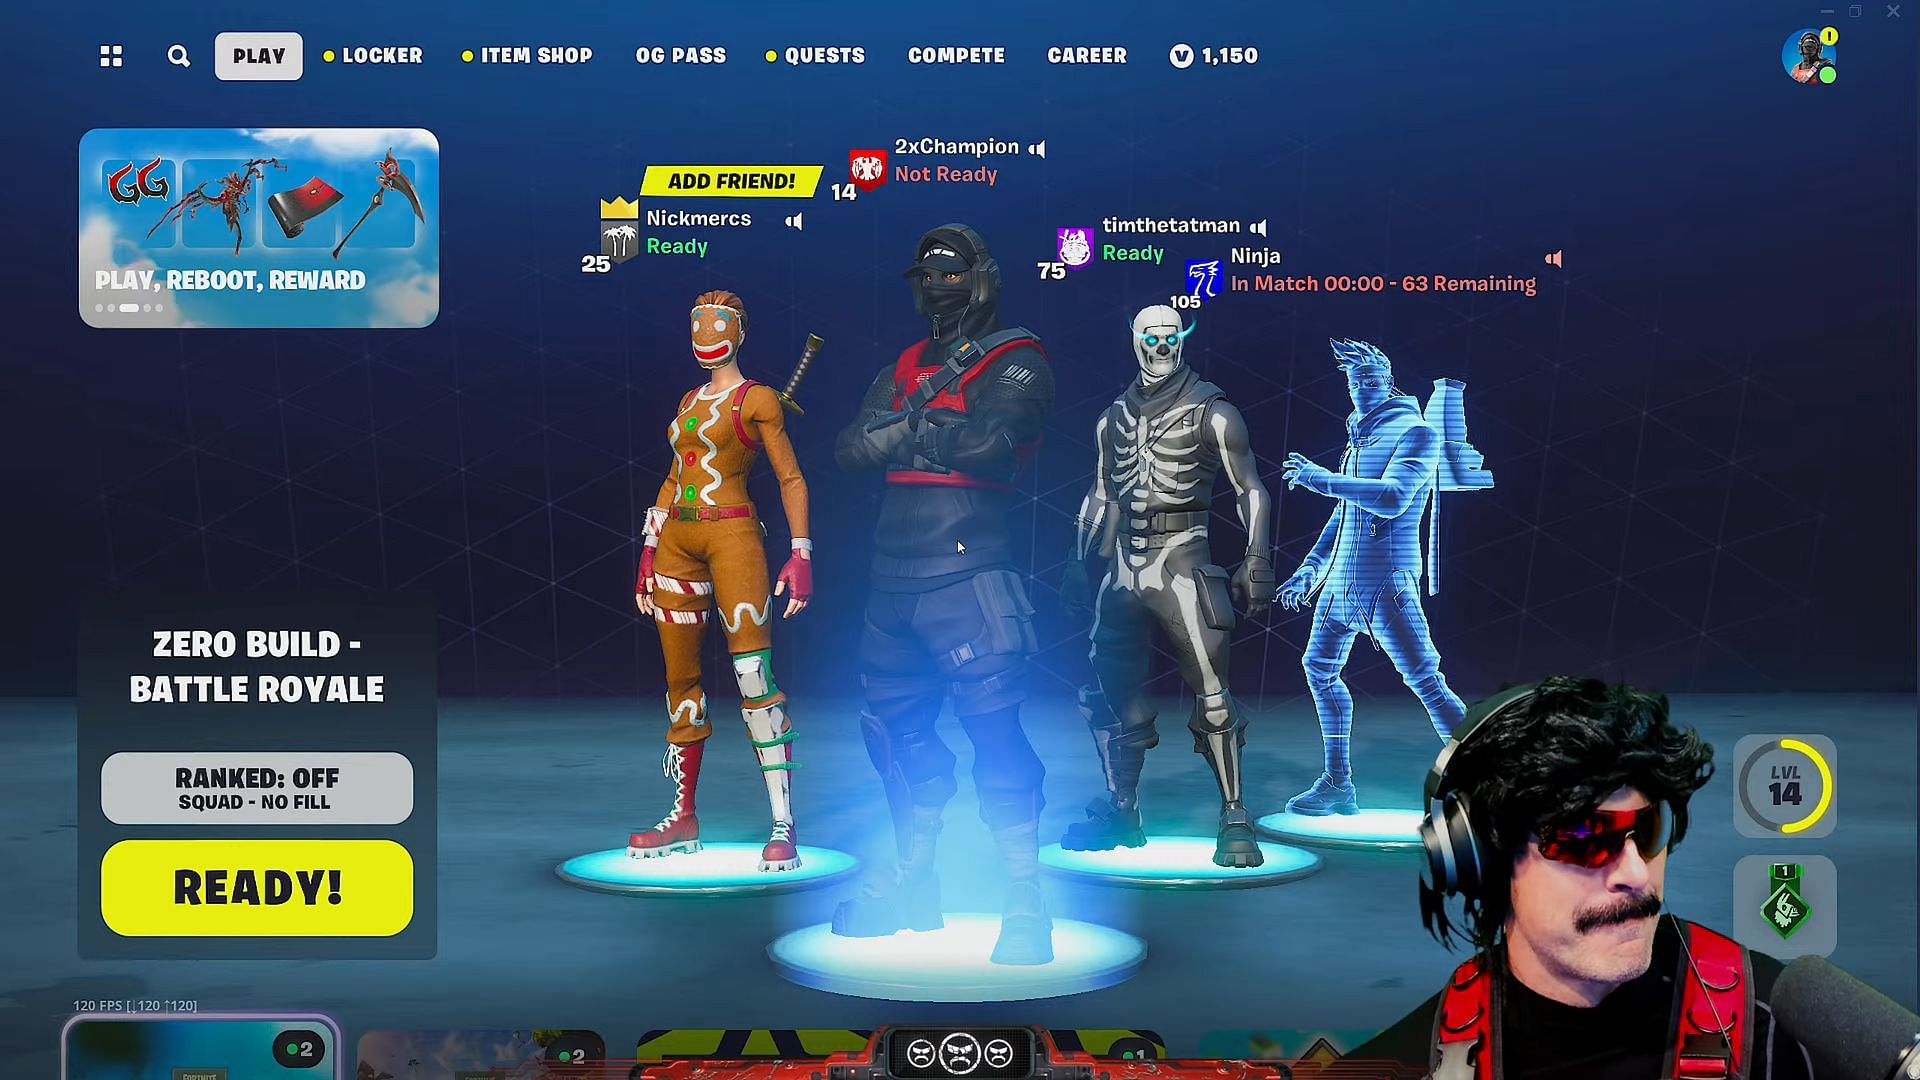 A screenshot of the four popular creators waiting in the lobby (Image via Dr DisRespect/YouTube)